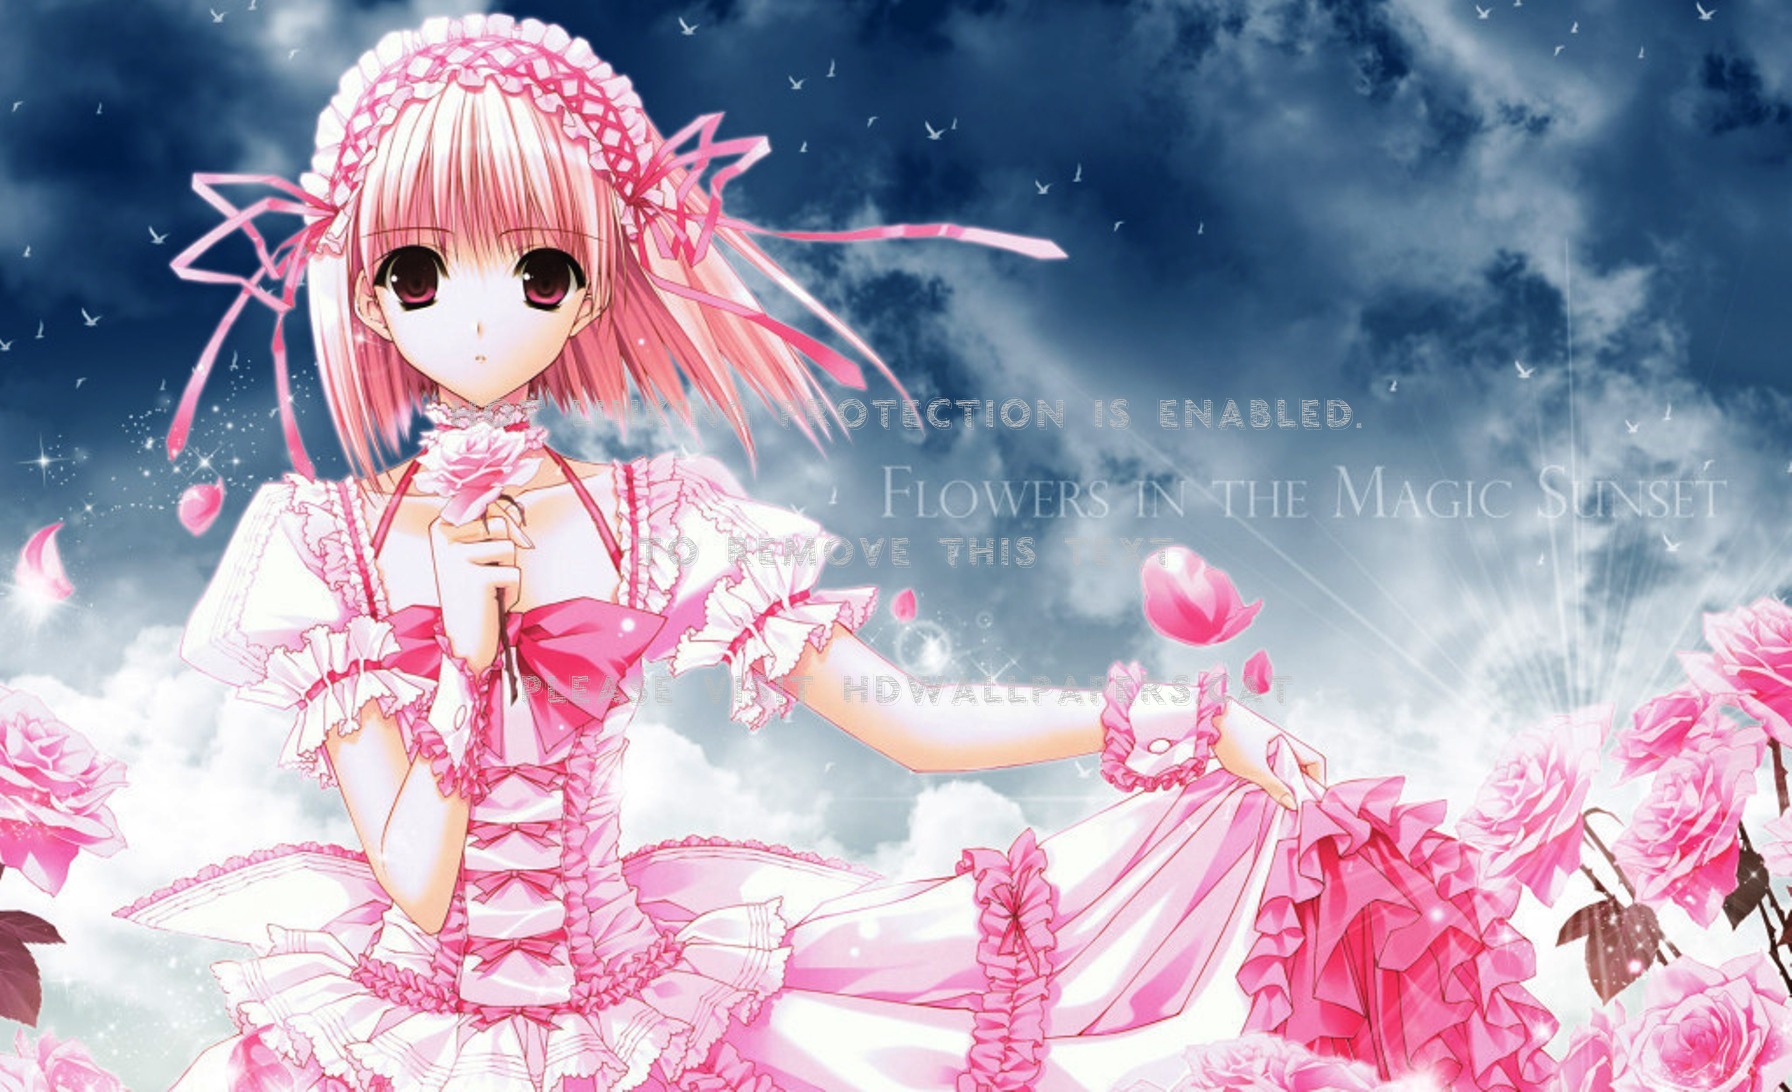 flowers in the magic sunset pink girl anime